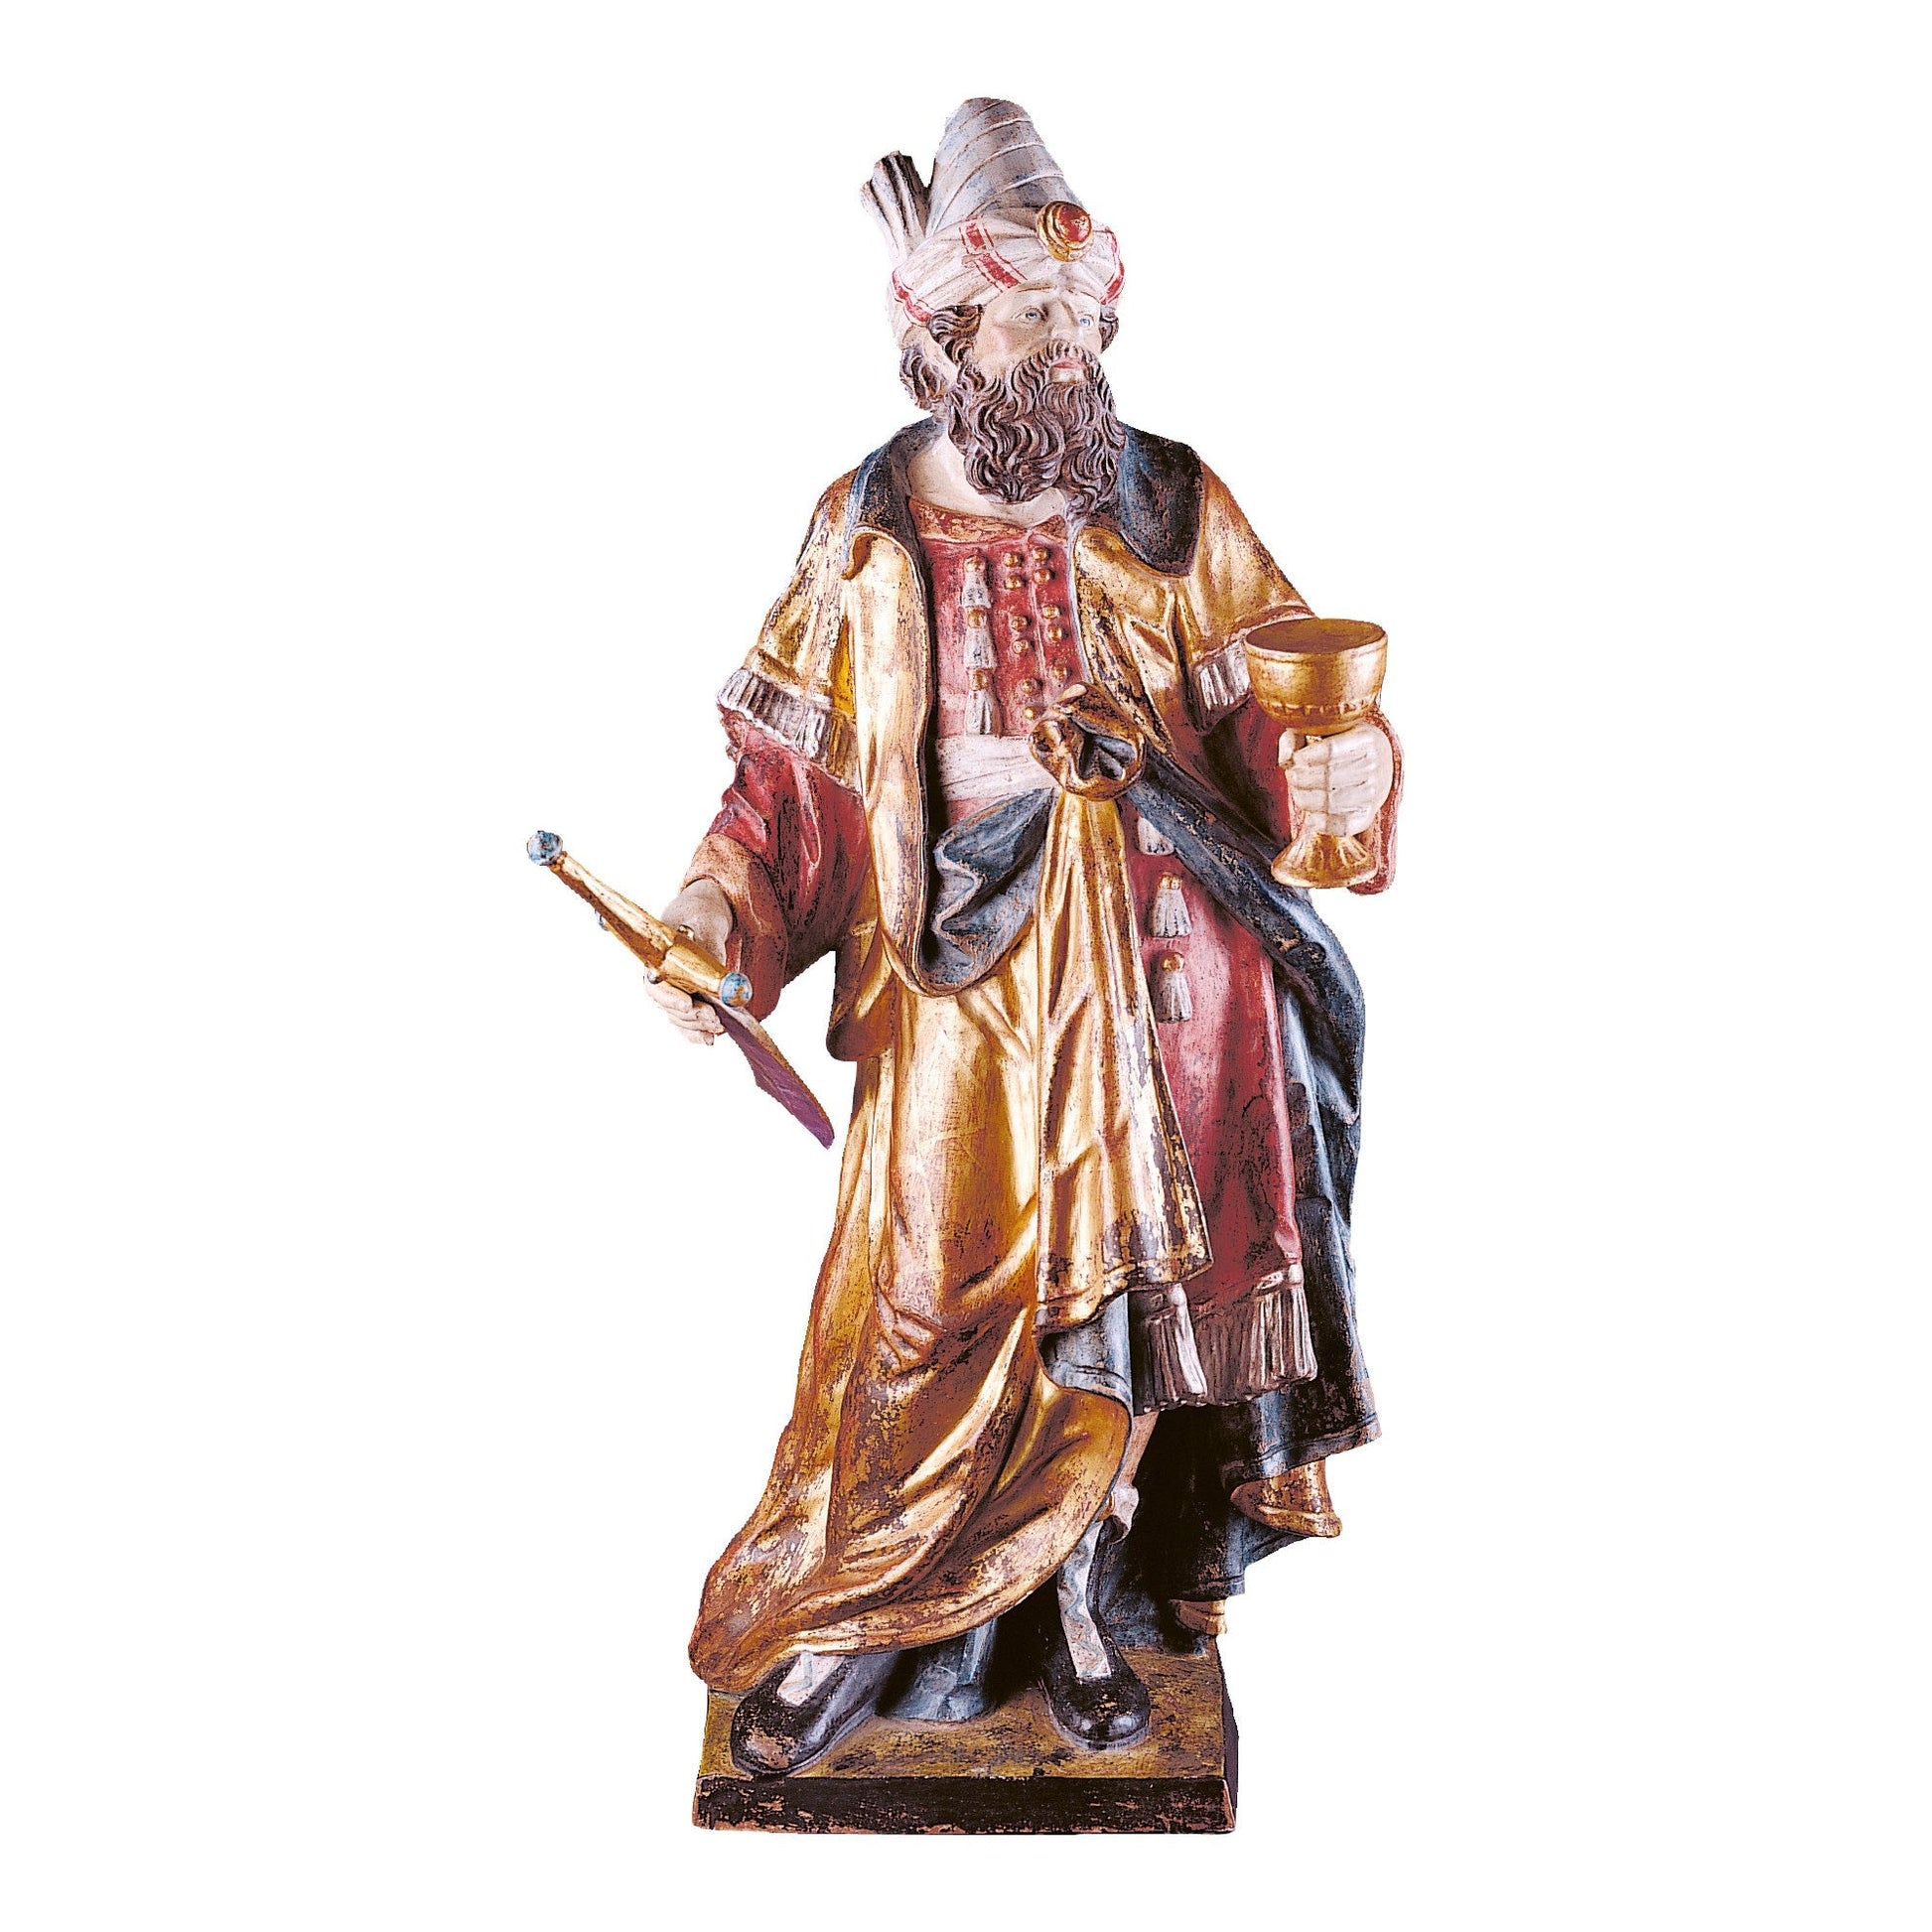 MONDO CATTOLICO Golden / 90 cm (35.4 in) Wooden Statue of St. Damian